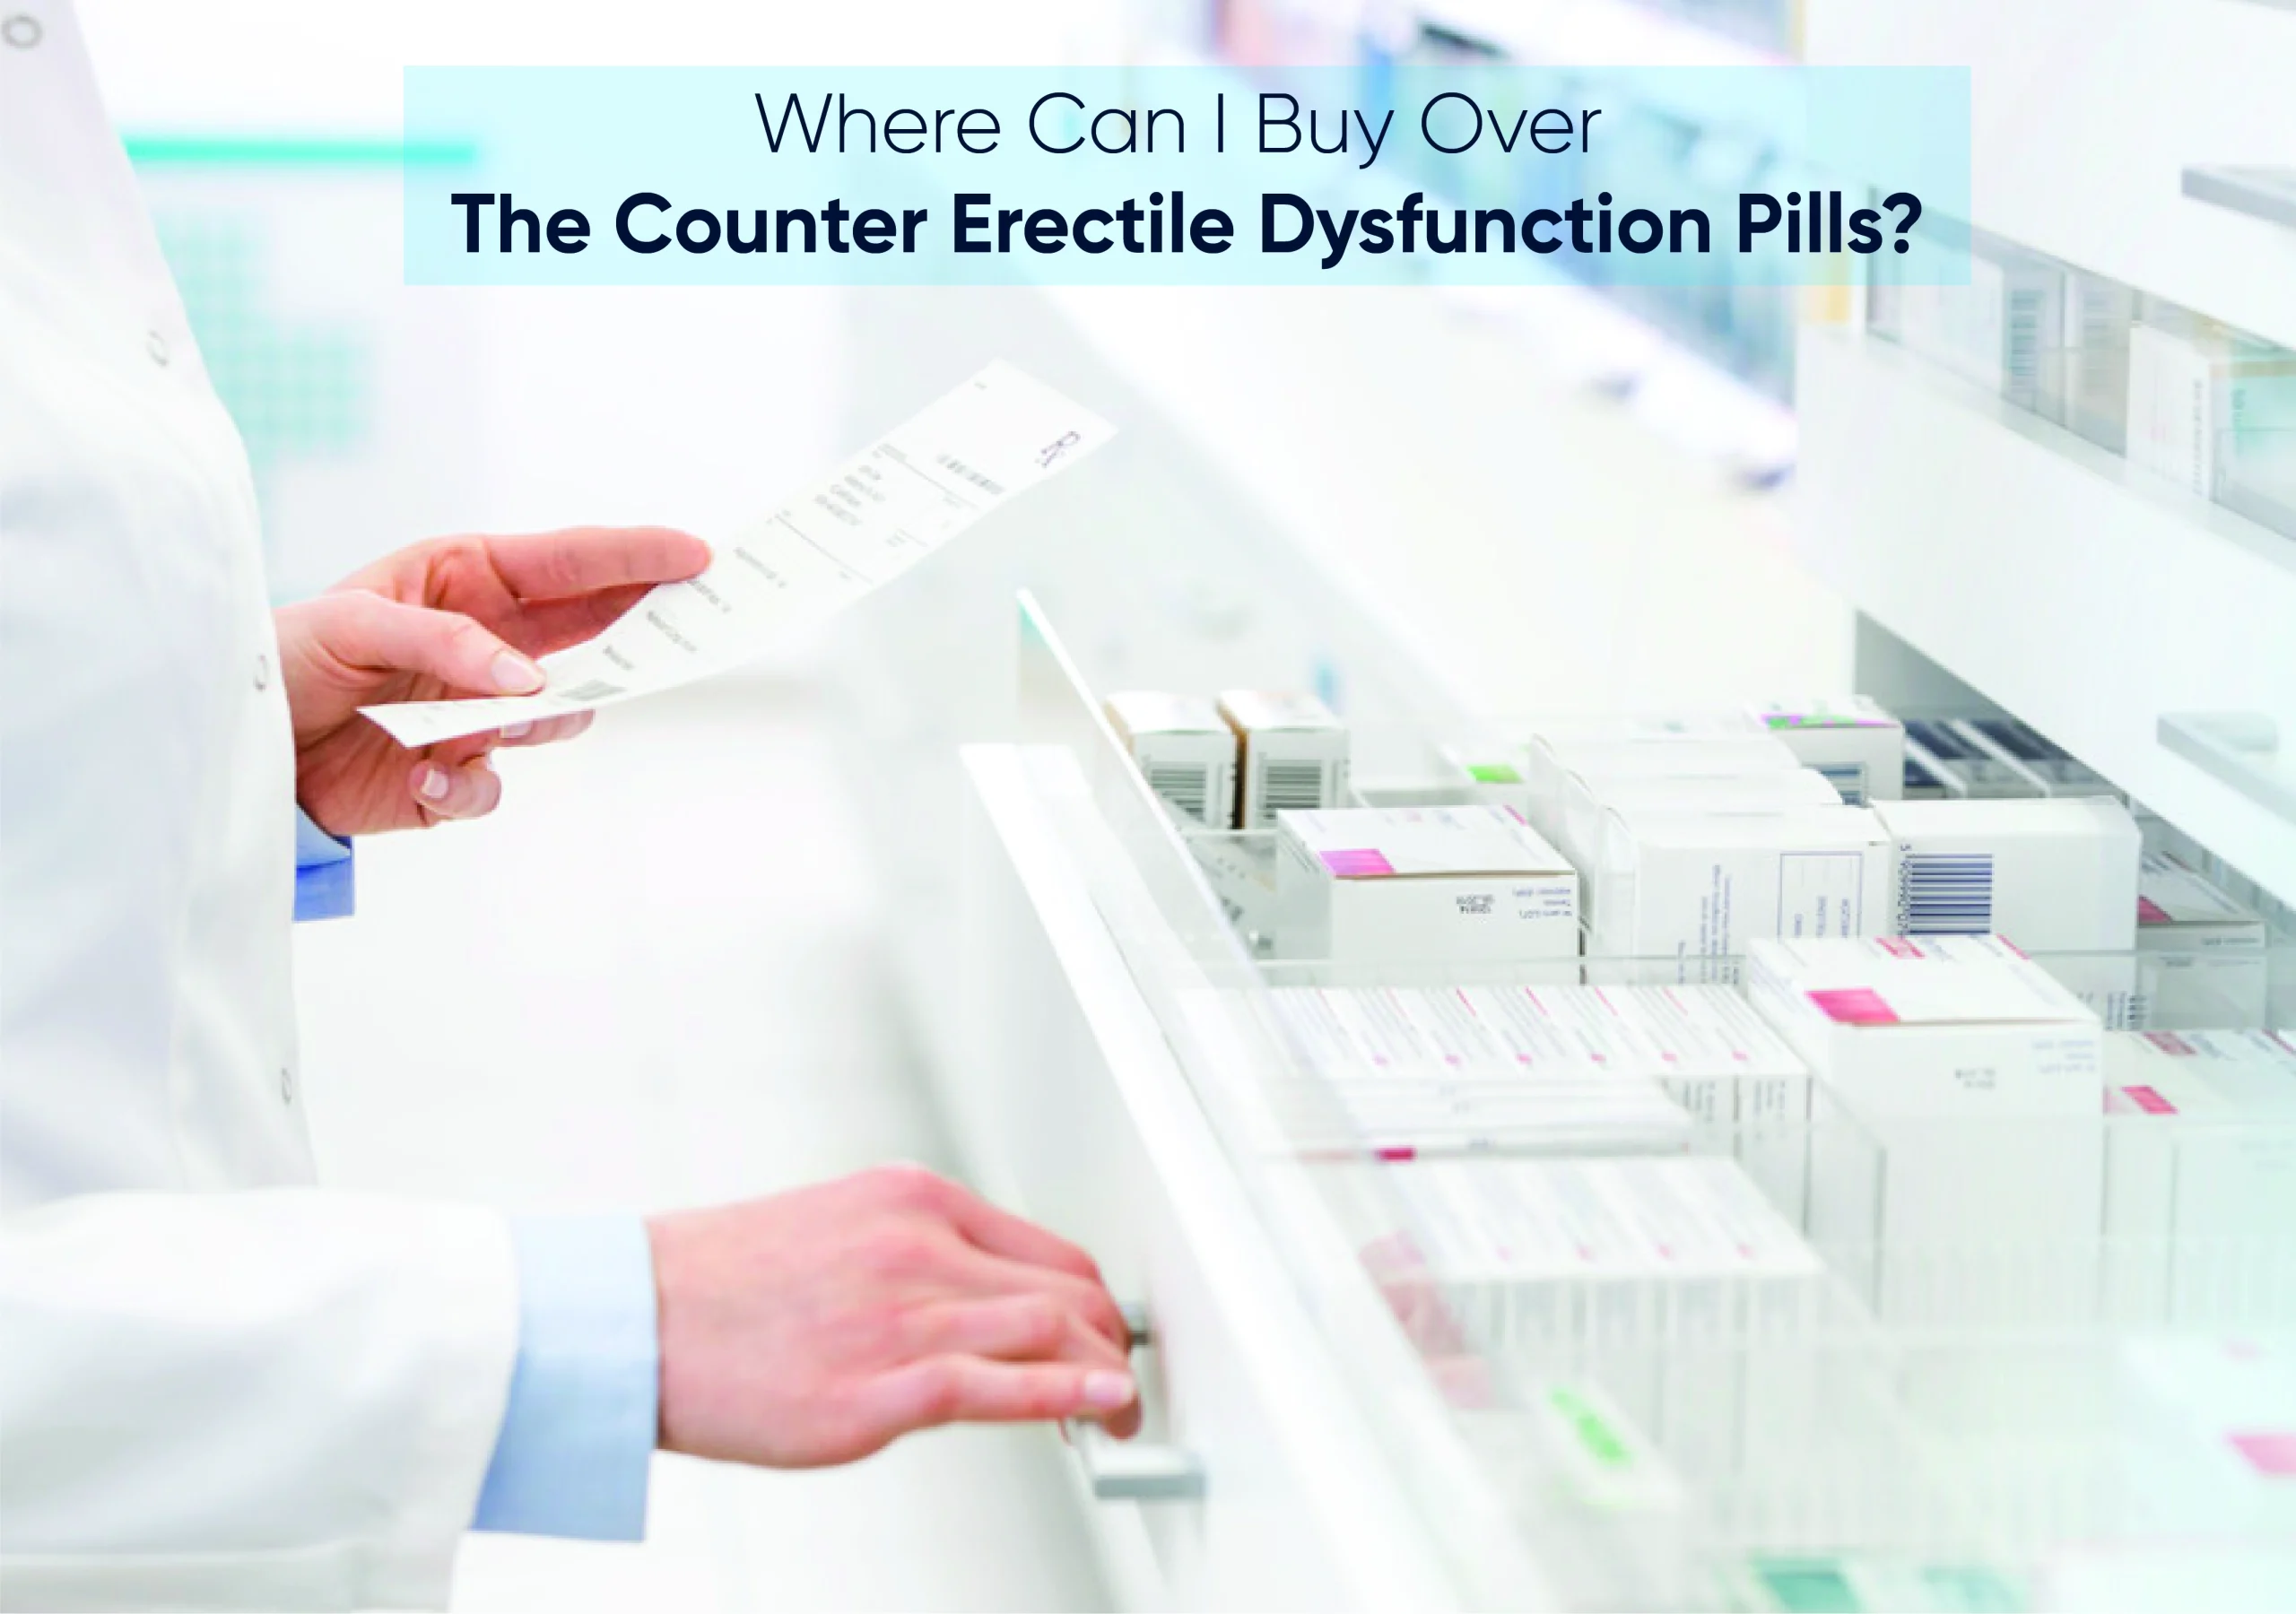 Where can I buy over the counter erectile dysfunction pills?